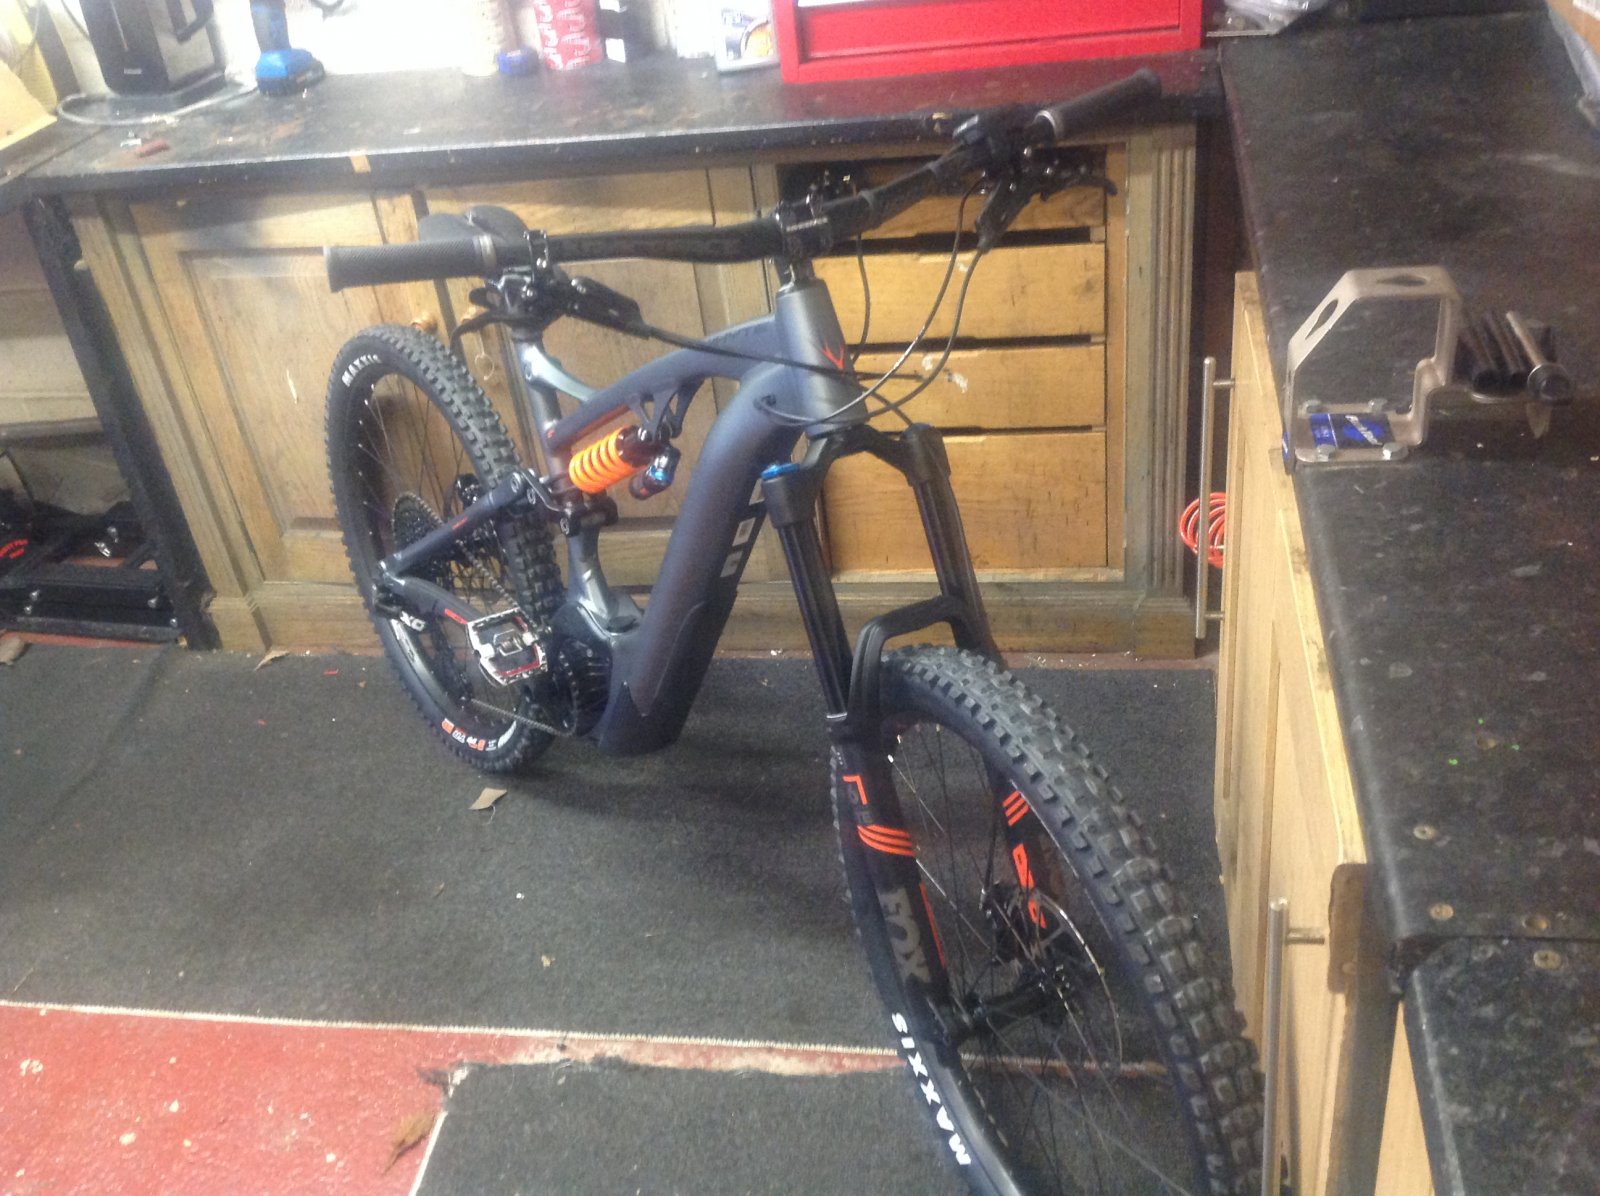 whyte e 180 rs